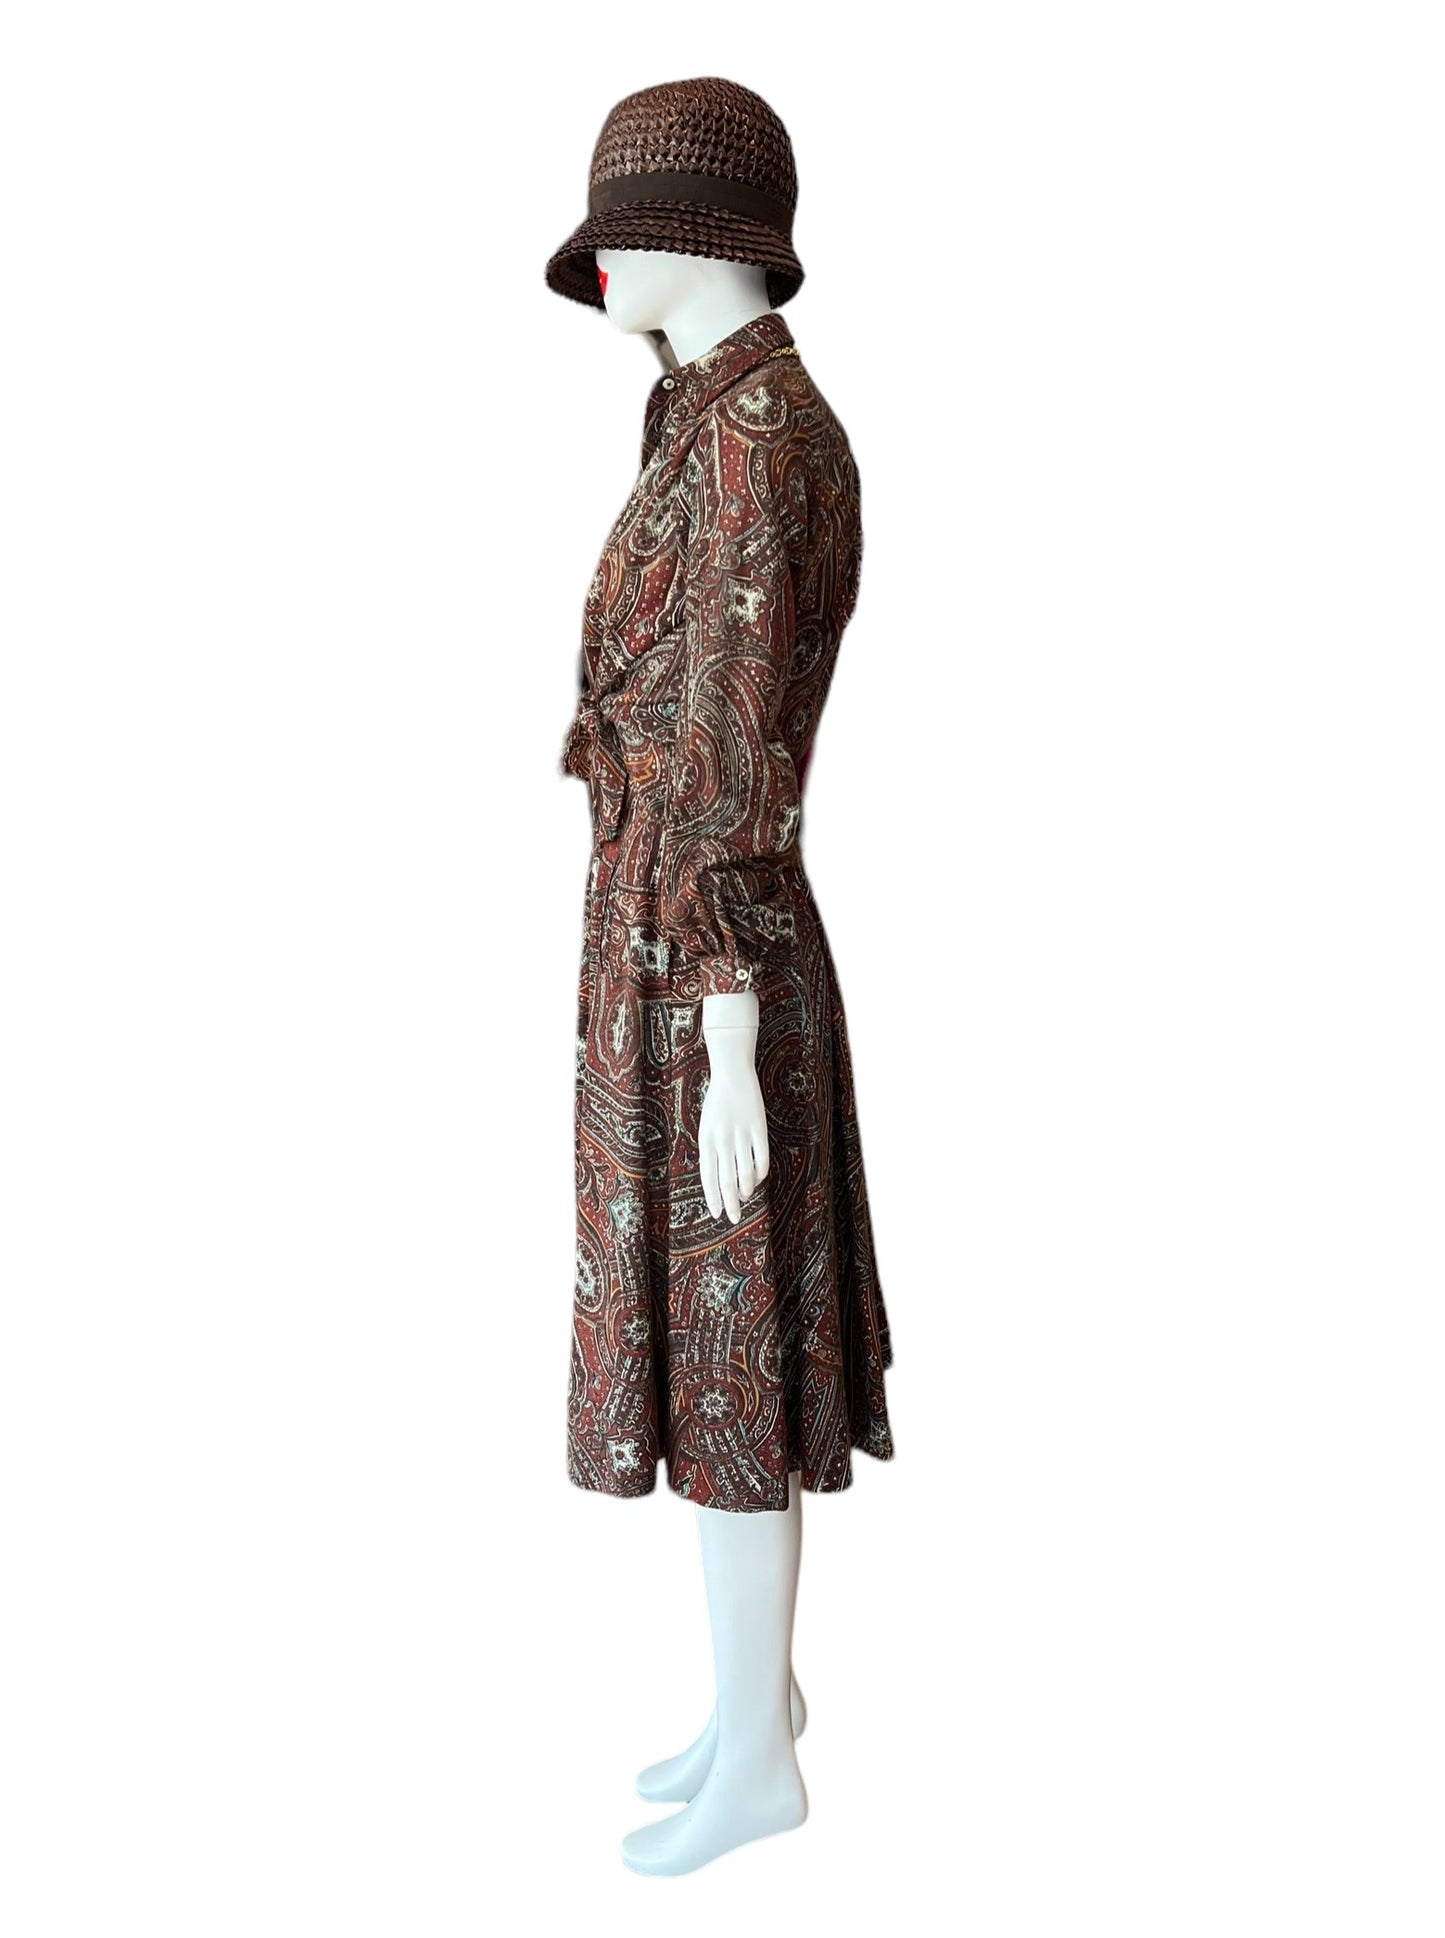 Two piece skirt and blouse set with burgundy and brown paisley pattern - evan picone